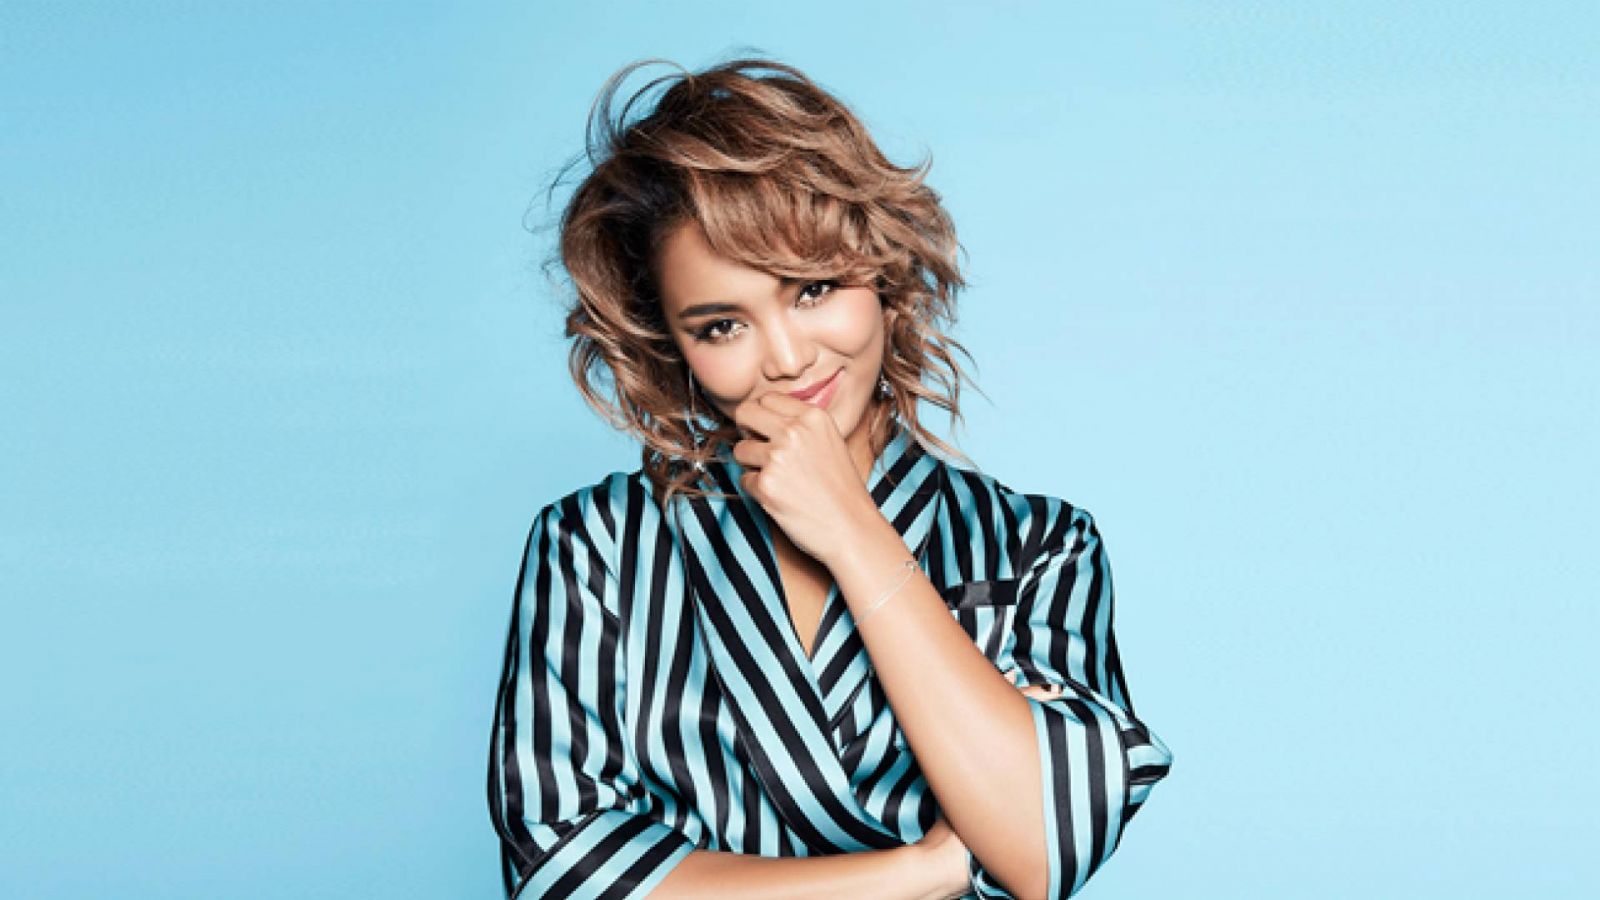 Crystal Kay © 2018 UNIVERSAL MUSIC LLC. All rights reserved.